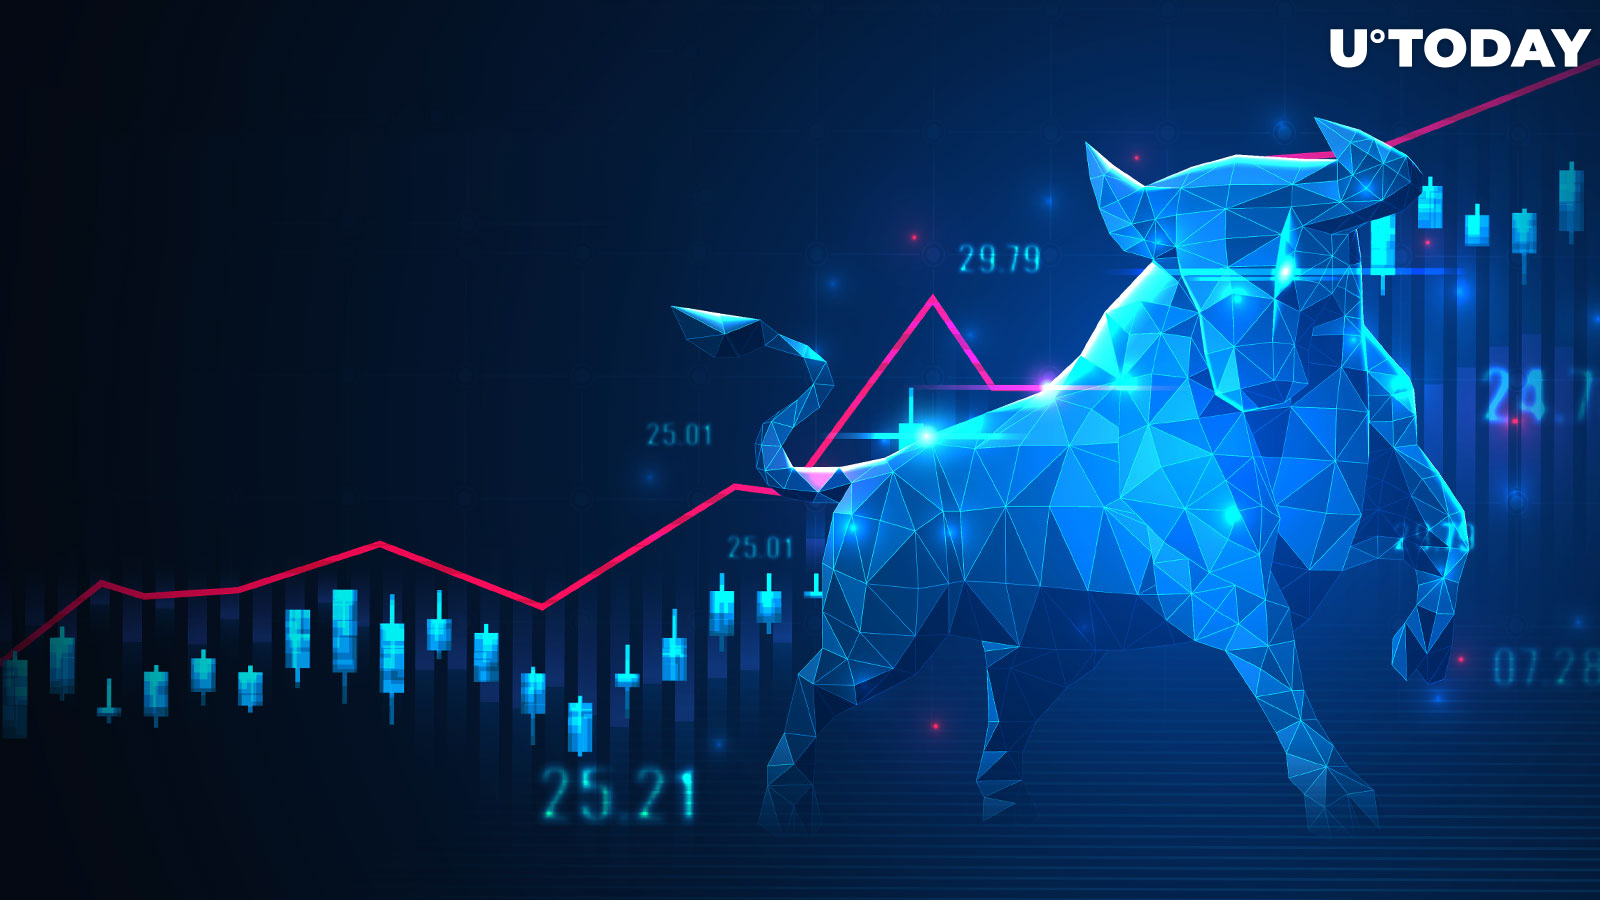 Bullish: Institutional Investors' Entry Point Spotted, Analyst Sights Possible Upswing